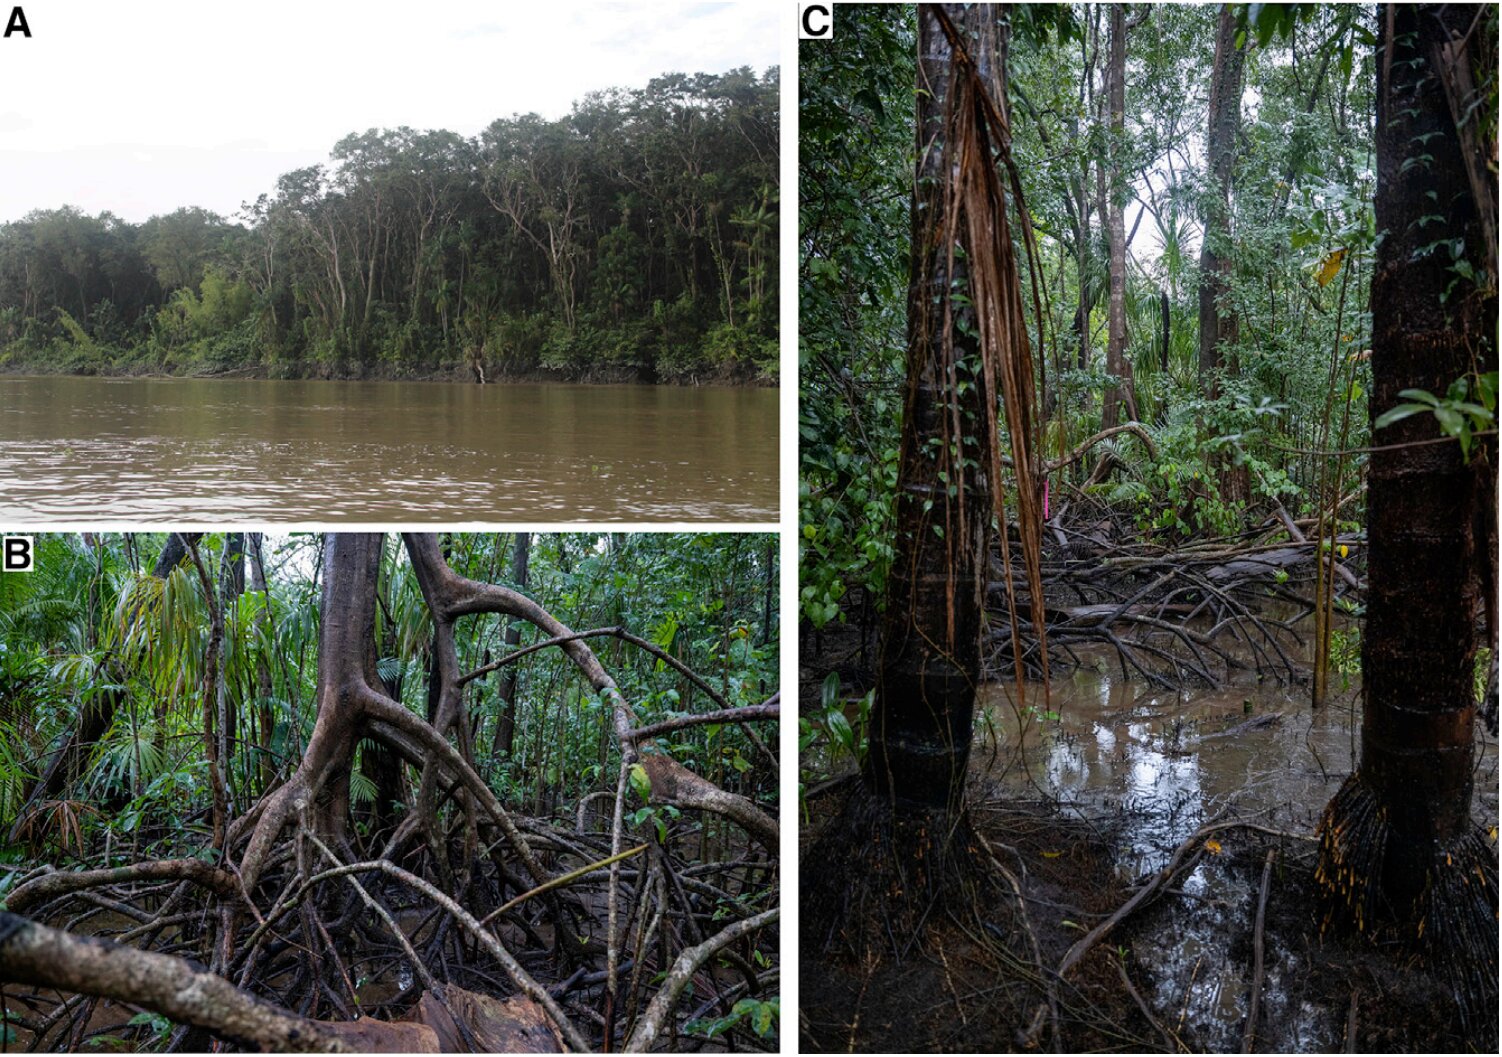 Mangrove forest found living in freshwater